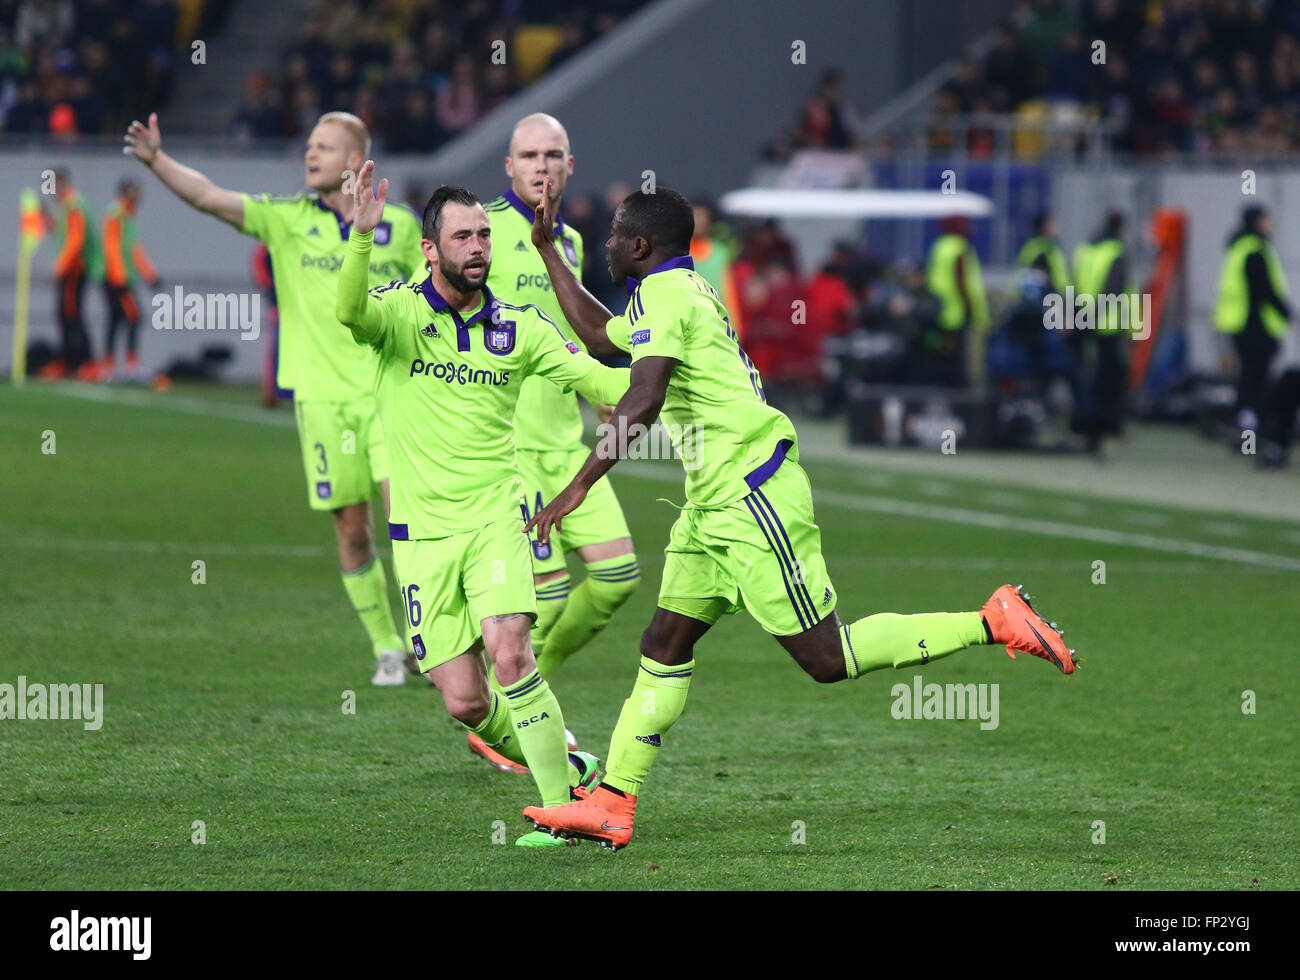 LVIV, UKRAINE - March 10, 2016: RSC Anderlecht players react after scored during the UEFA Europa League Round of 16 game against Stock Photo